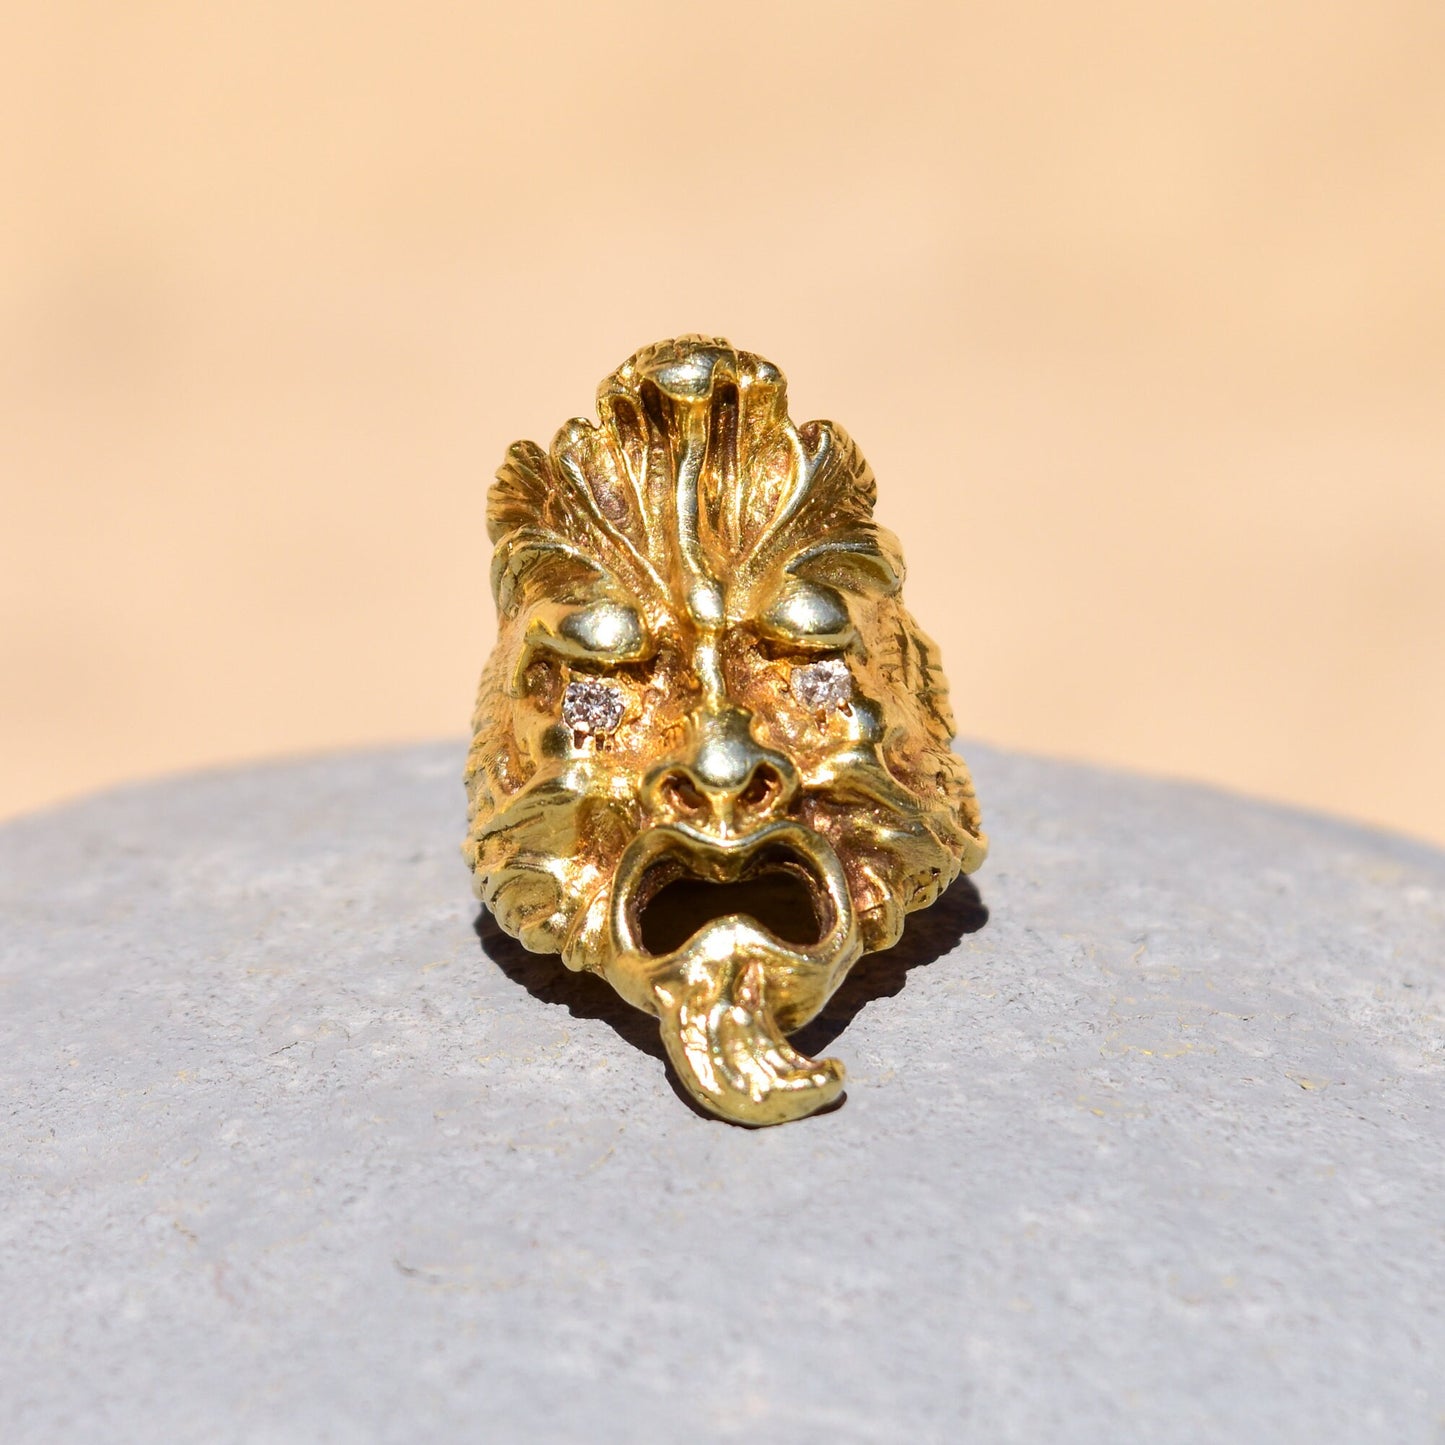 Solid 14K gold sculpted face men's ring with diamond eyes, crafted in a detailed mask design. A unique statement ring with .20 total carat weight diamonds, size 9 US.